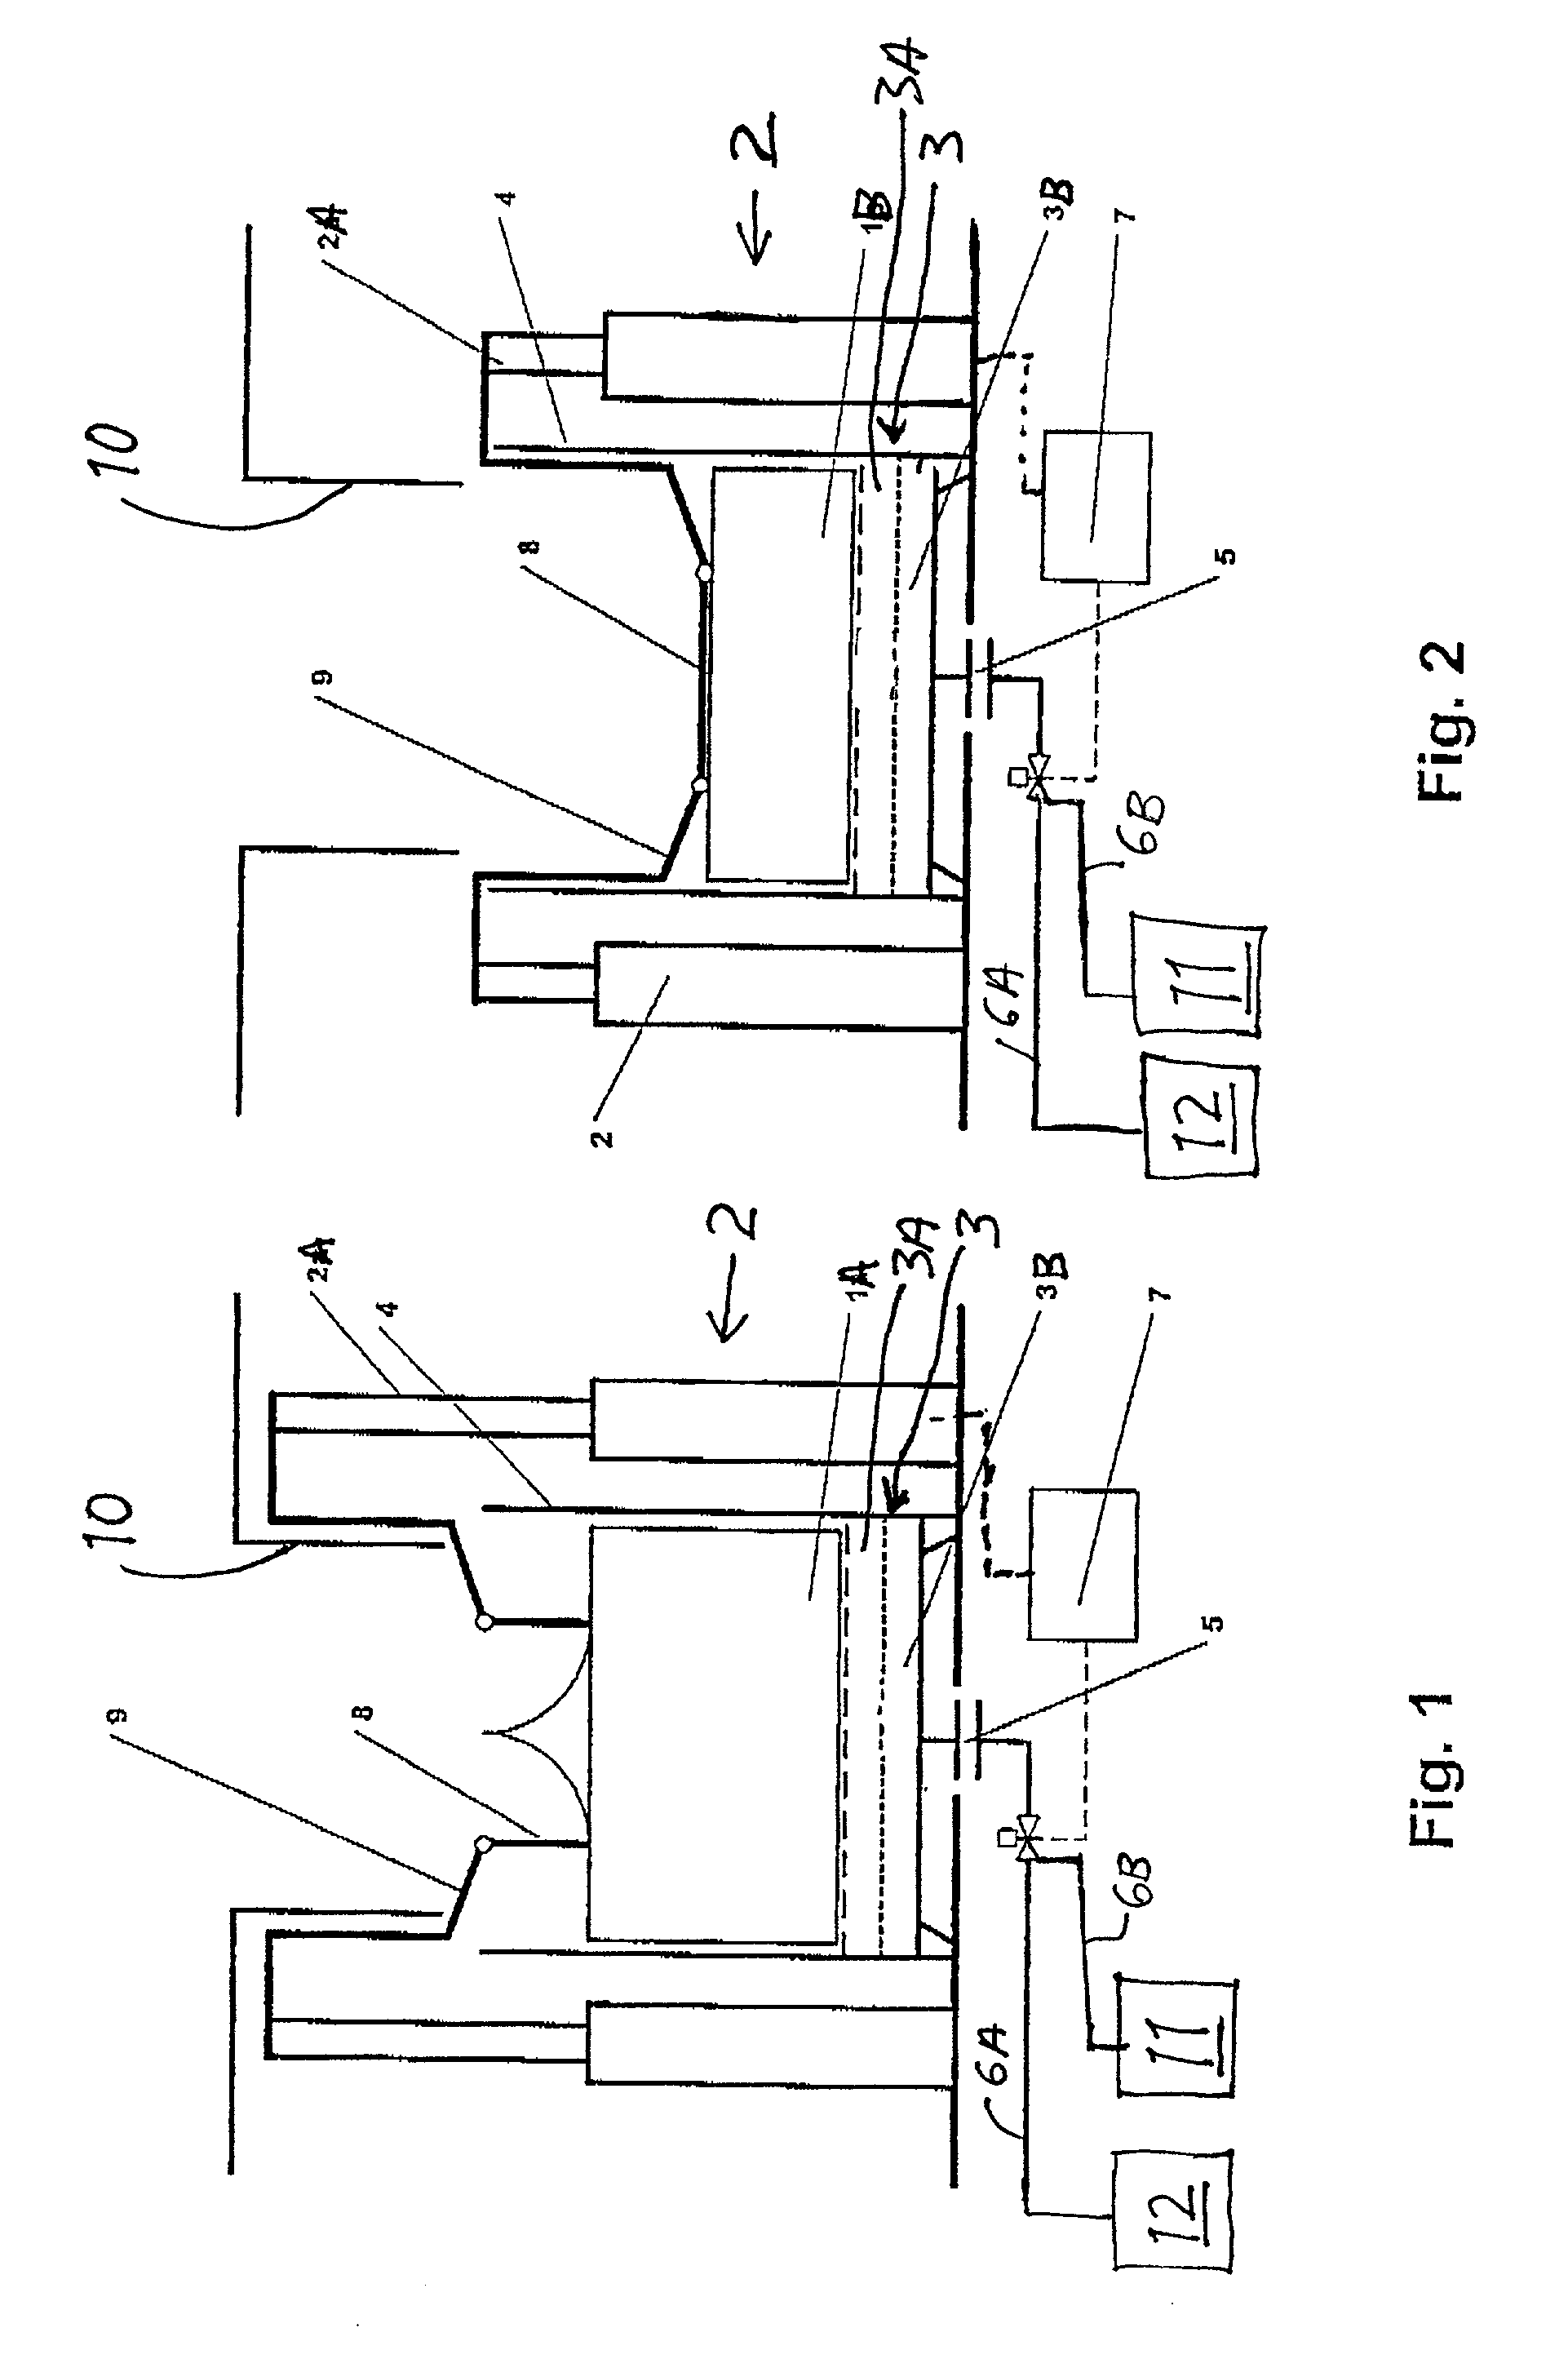 Apparatus for compacting and draining mixed waste in passenger transport vehicles